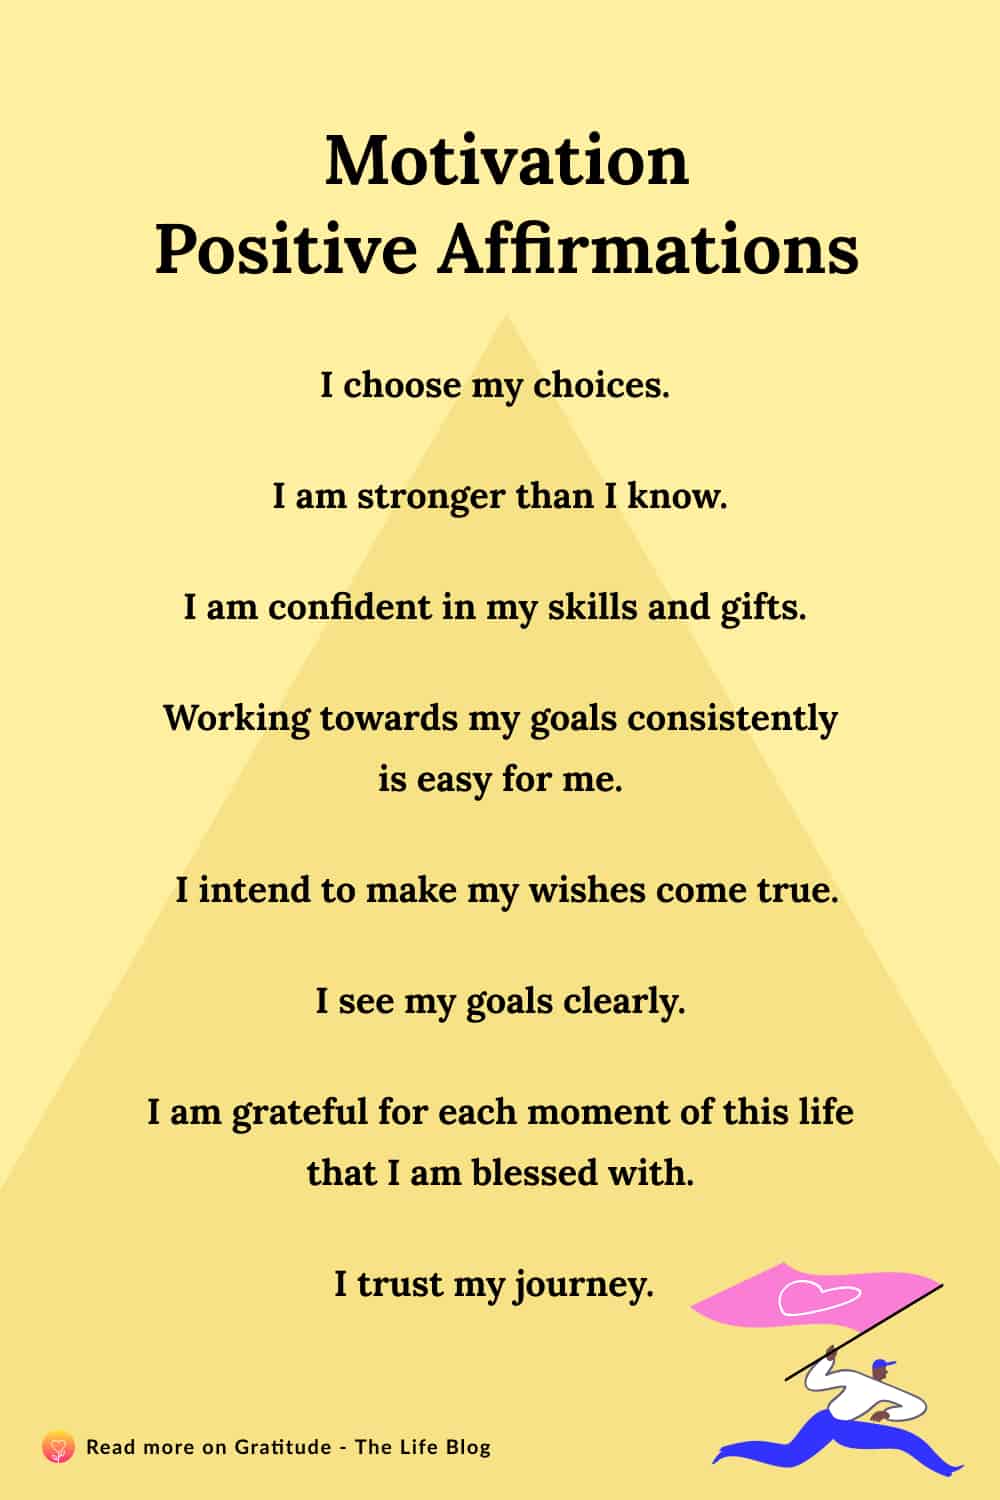 Image with list of motivation positive affirmations